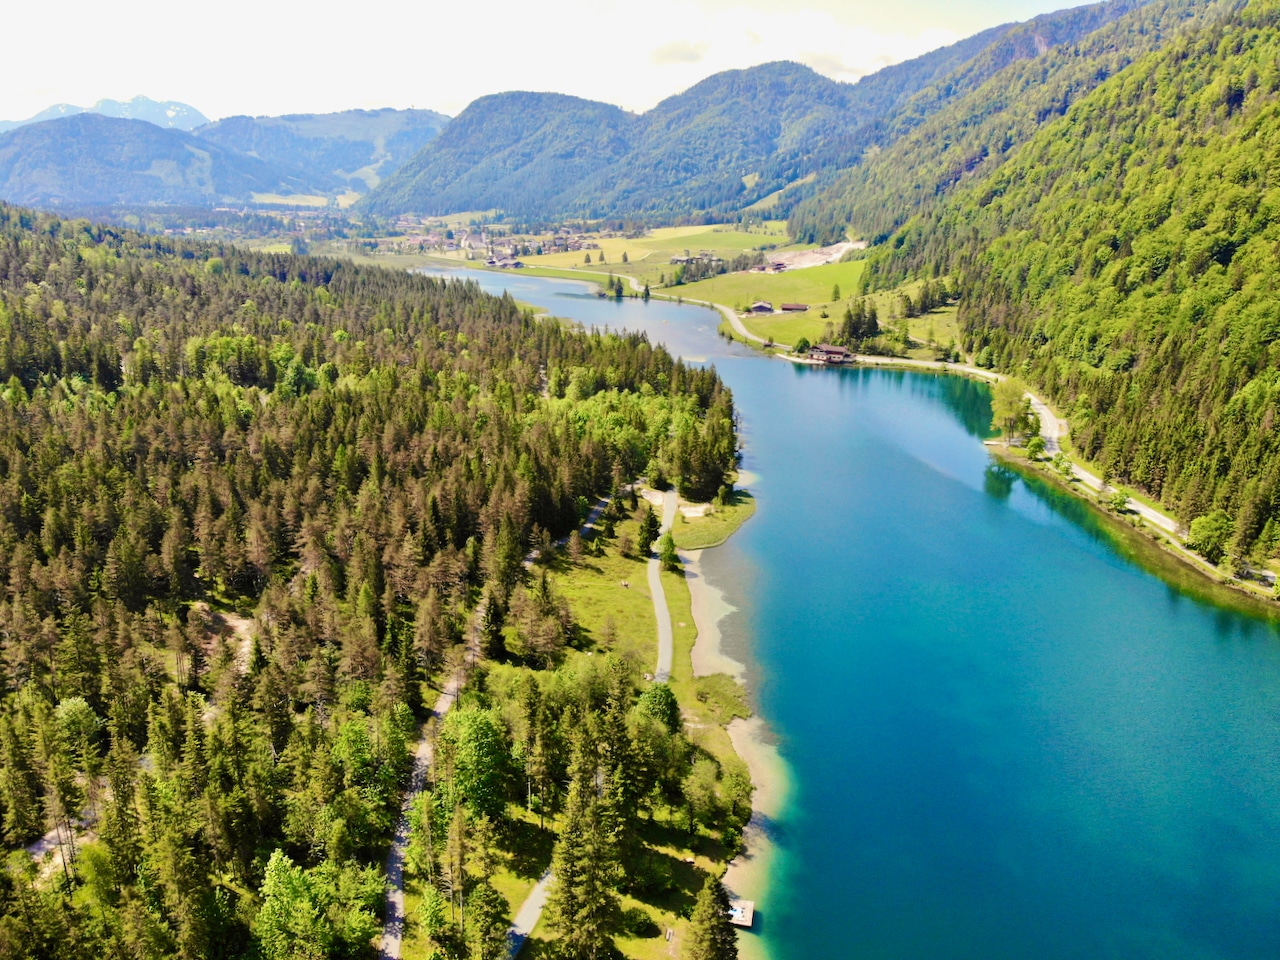 The approximately 24-hectare mountain lake, which is located in the charming Pillerseetal near the municipality of St. Ulrich am Pillersee at an altitude of 835 meters, is a real attraction for locals and visitors alike. SUP on the Pillersee Experience report Stand Up Paddling